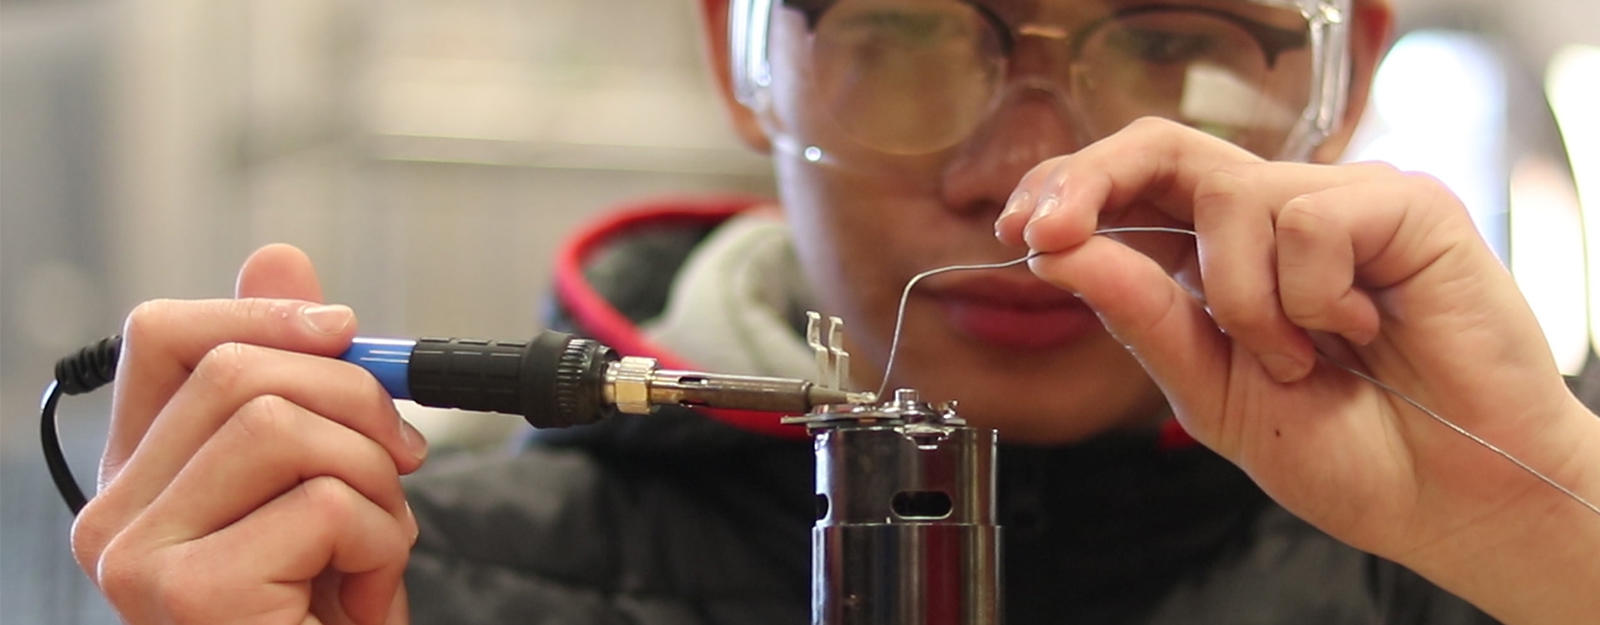 Student soldering a wire.